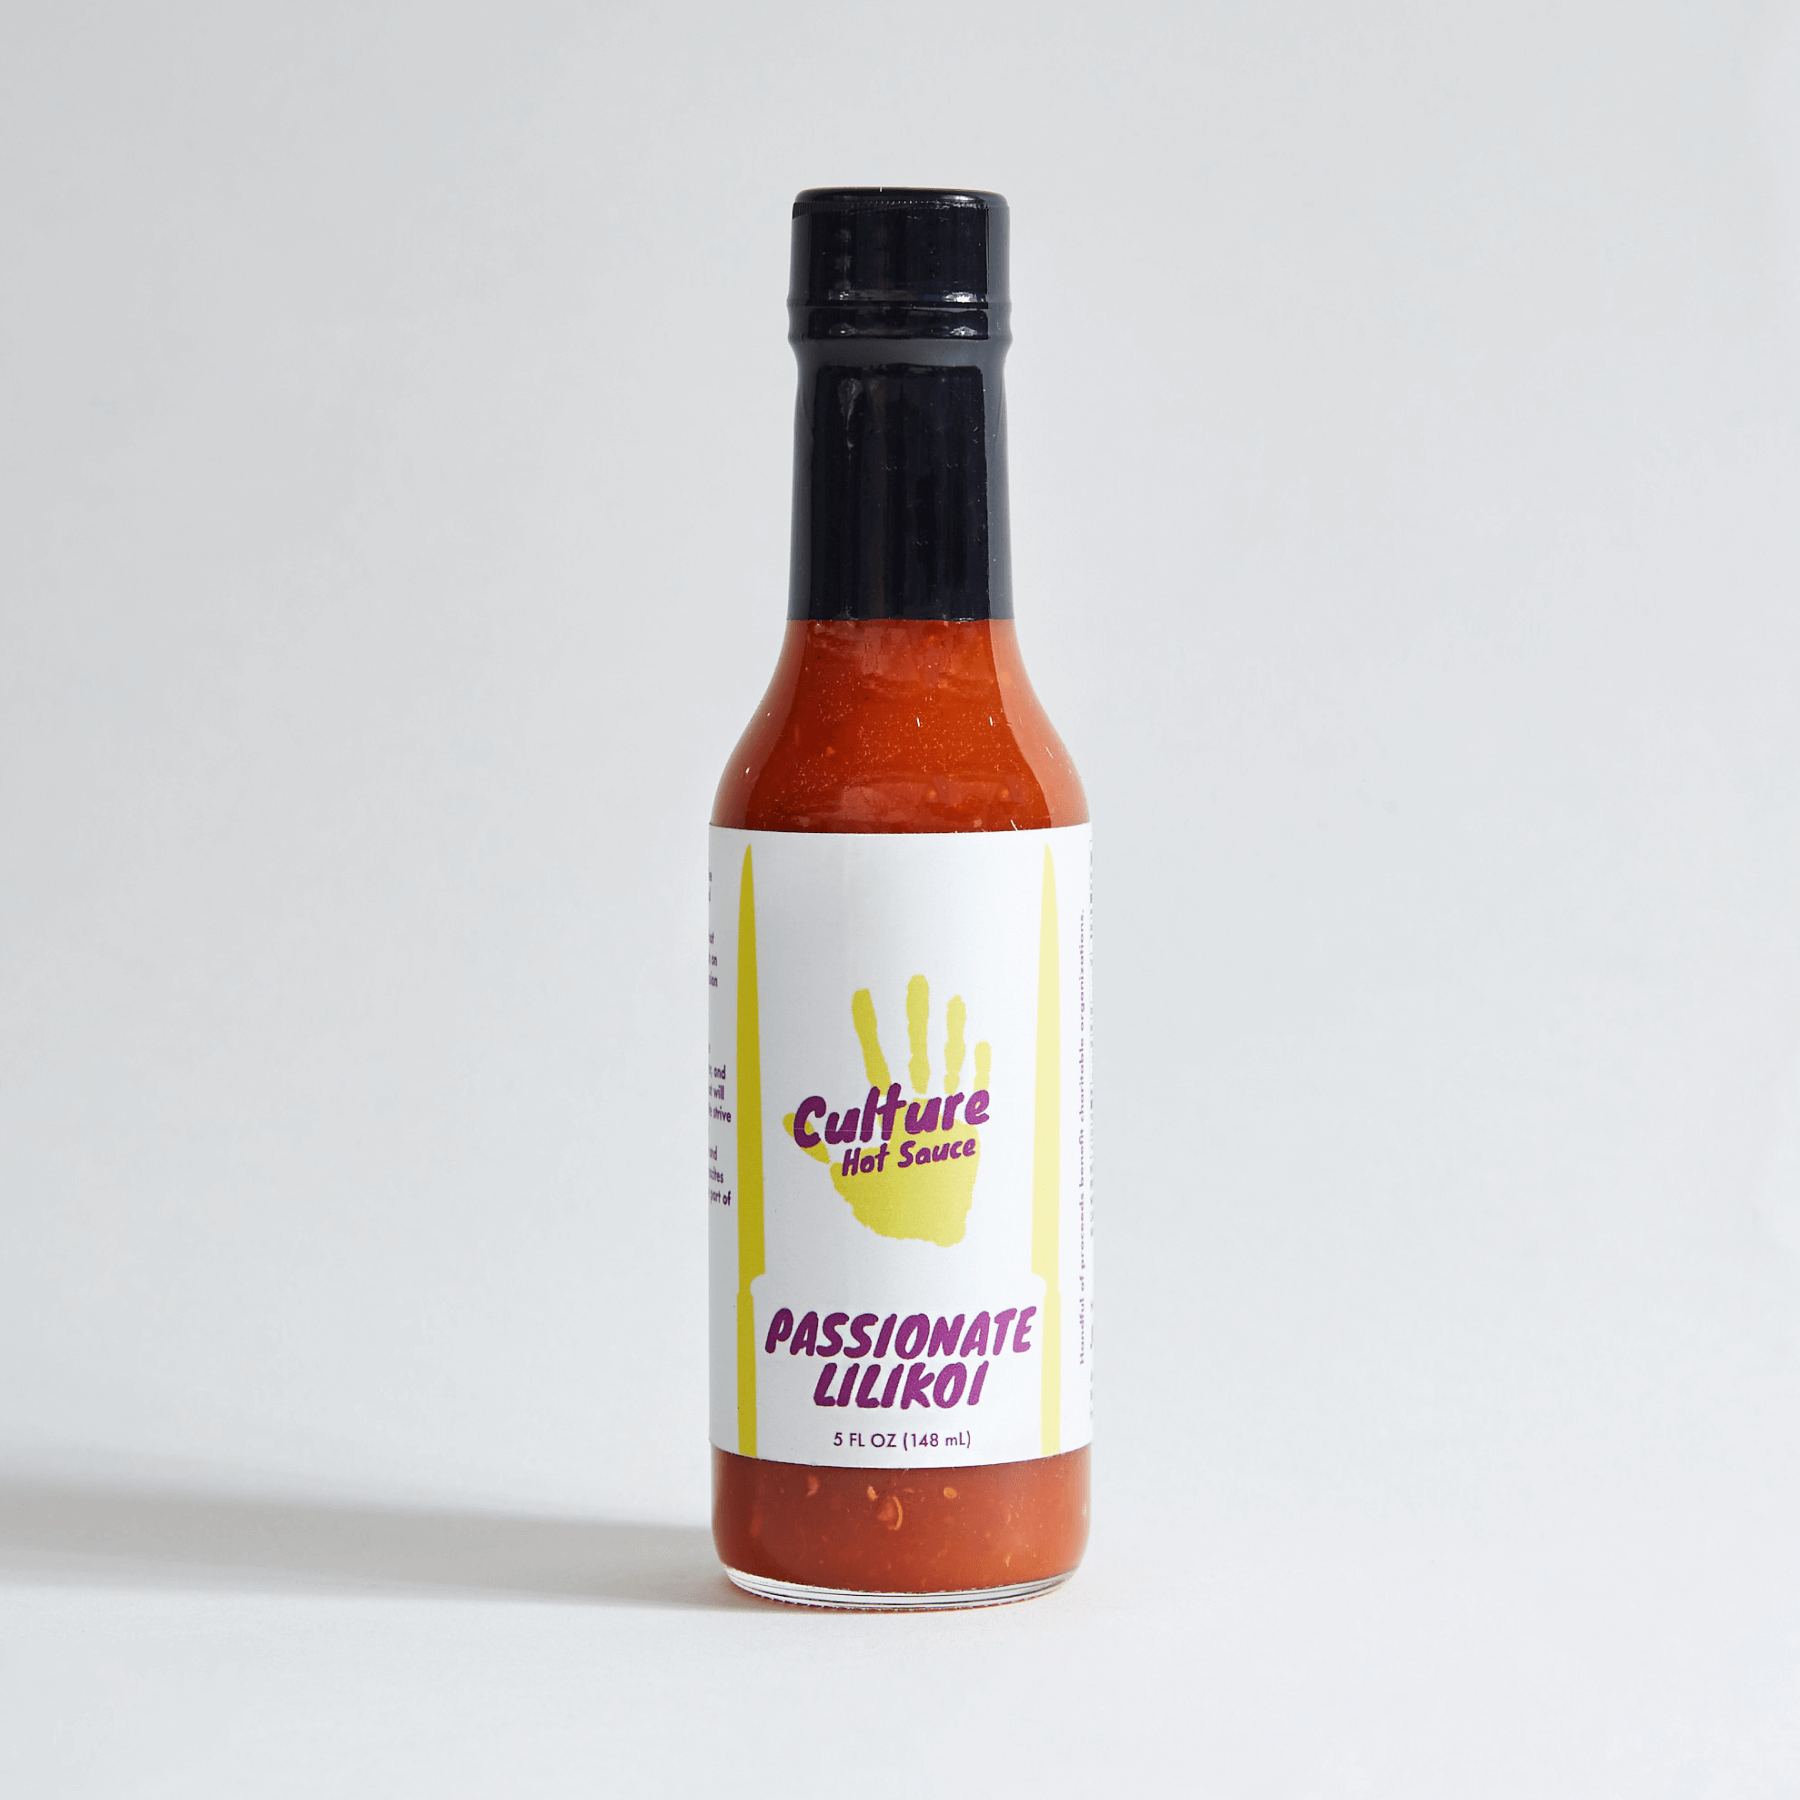 passionate lilikoi hot sauce, passion fruit, buffalo style, sweet and sour southern hot sauce, chicken wings